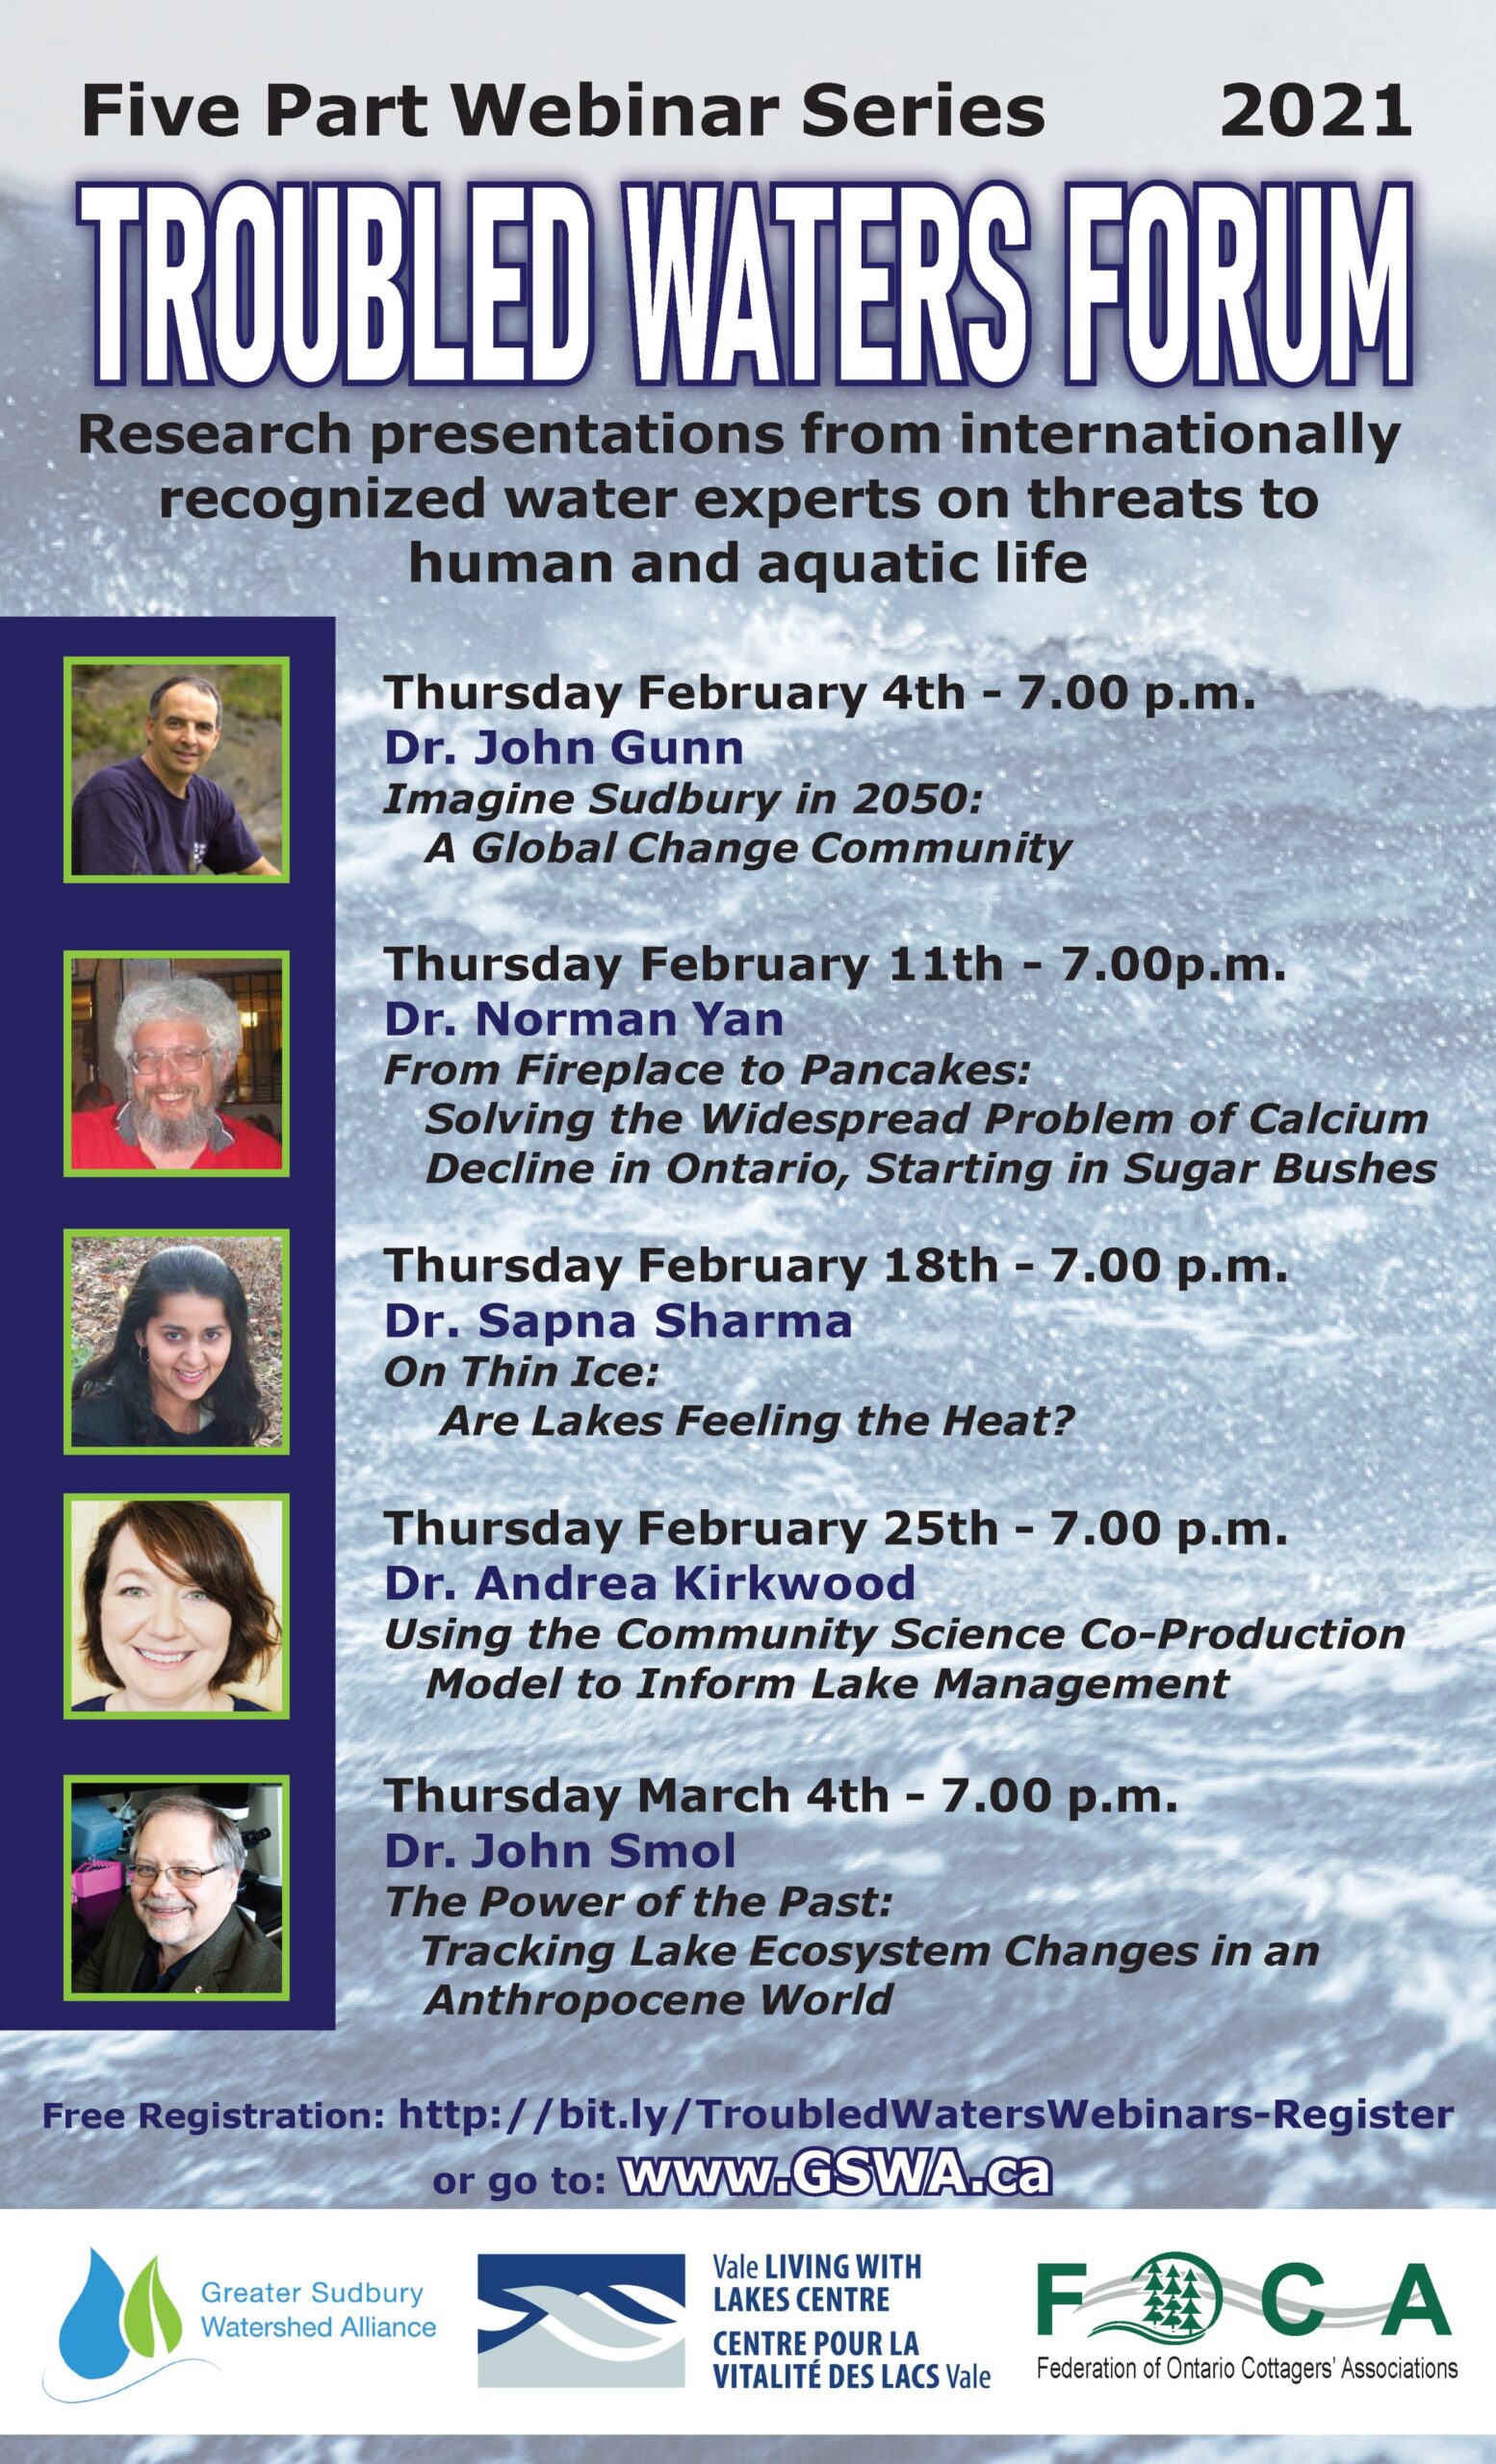 Troubled Waters Forum poster outlineing webinar topics and speakers.